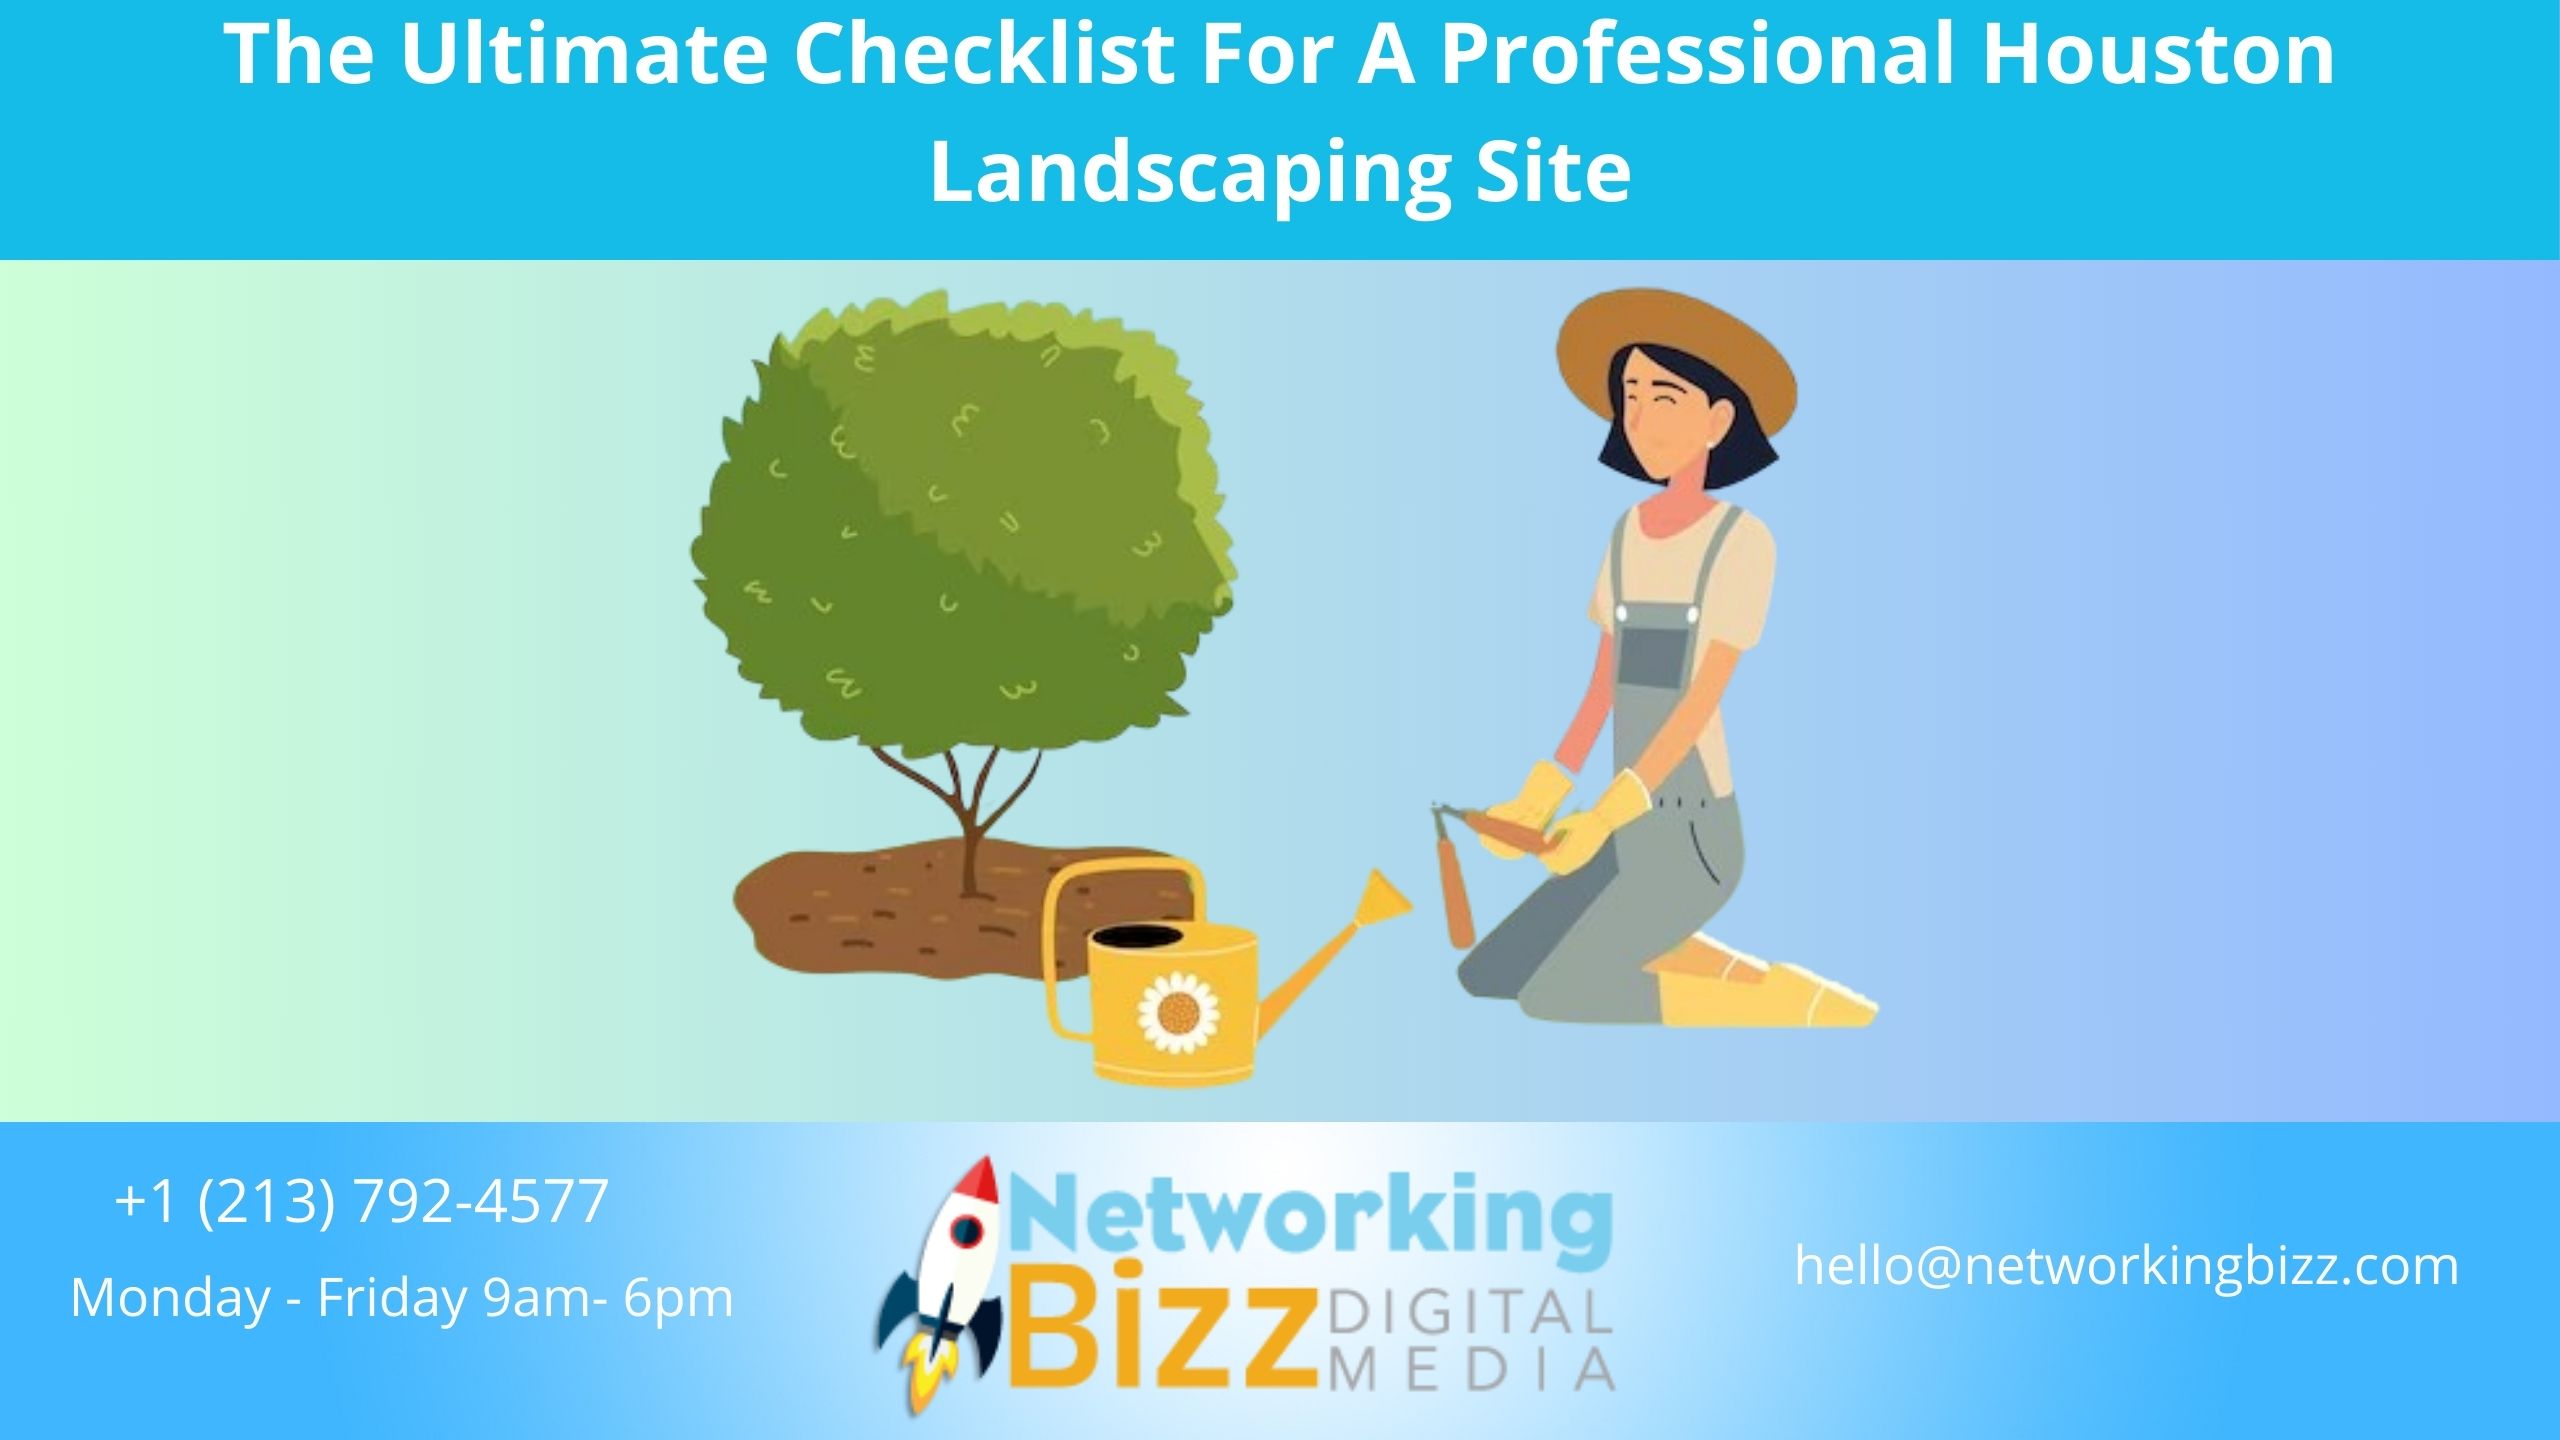 The Ultimate Checklist For A Professional Houston Landscaping Site